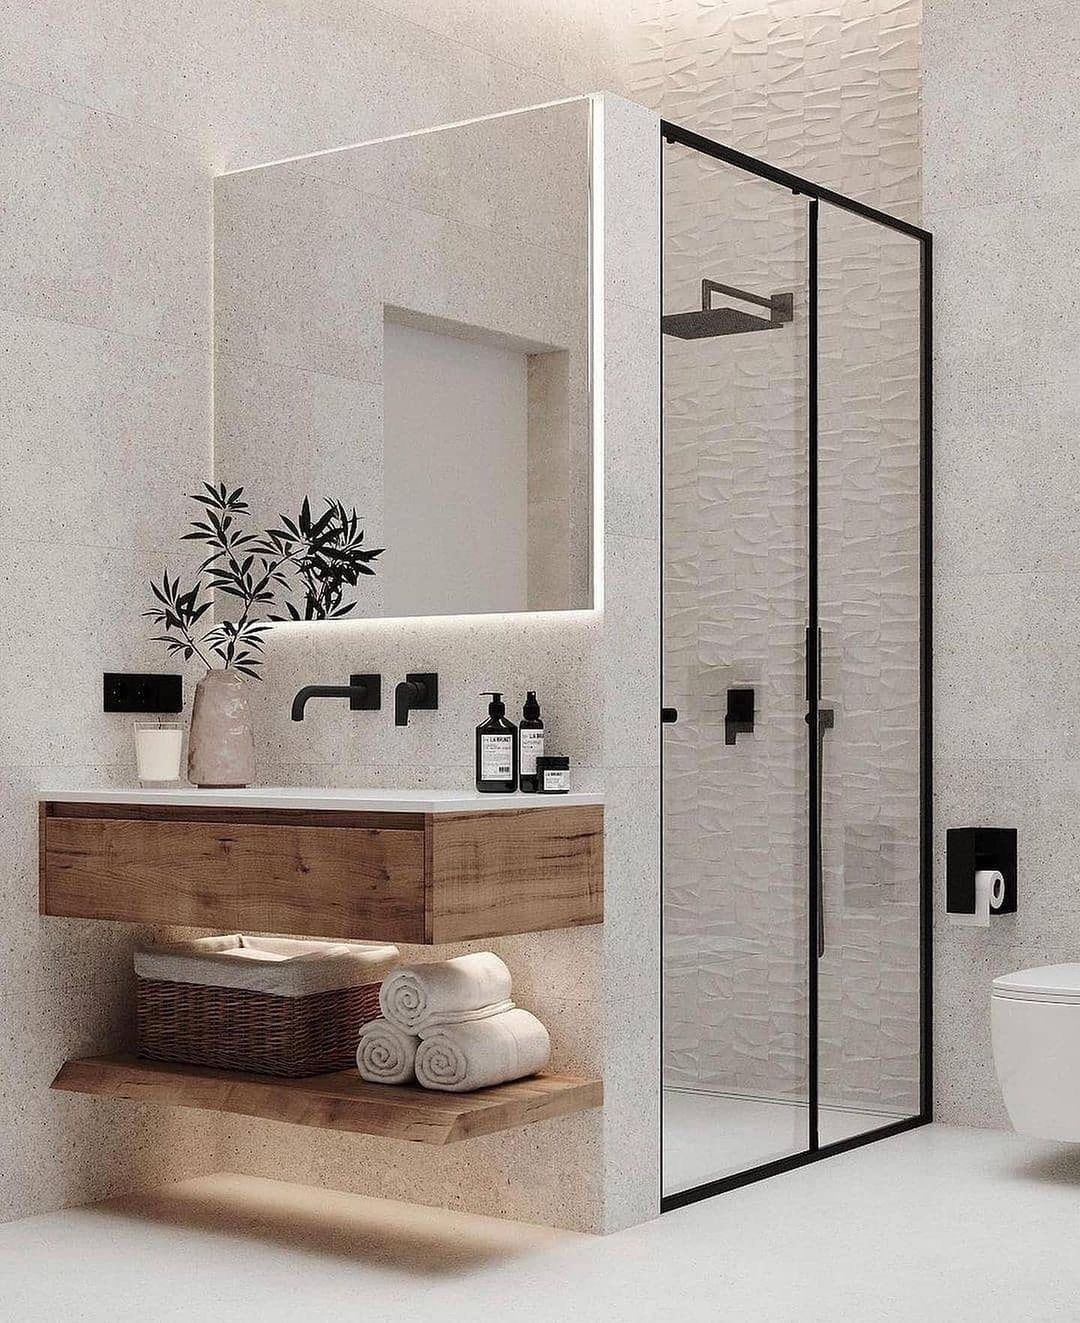 The Significance Of Contemporary
Bathrooms